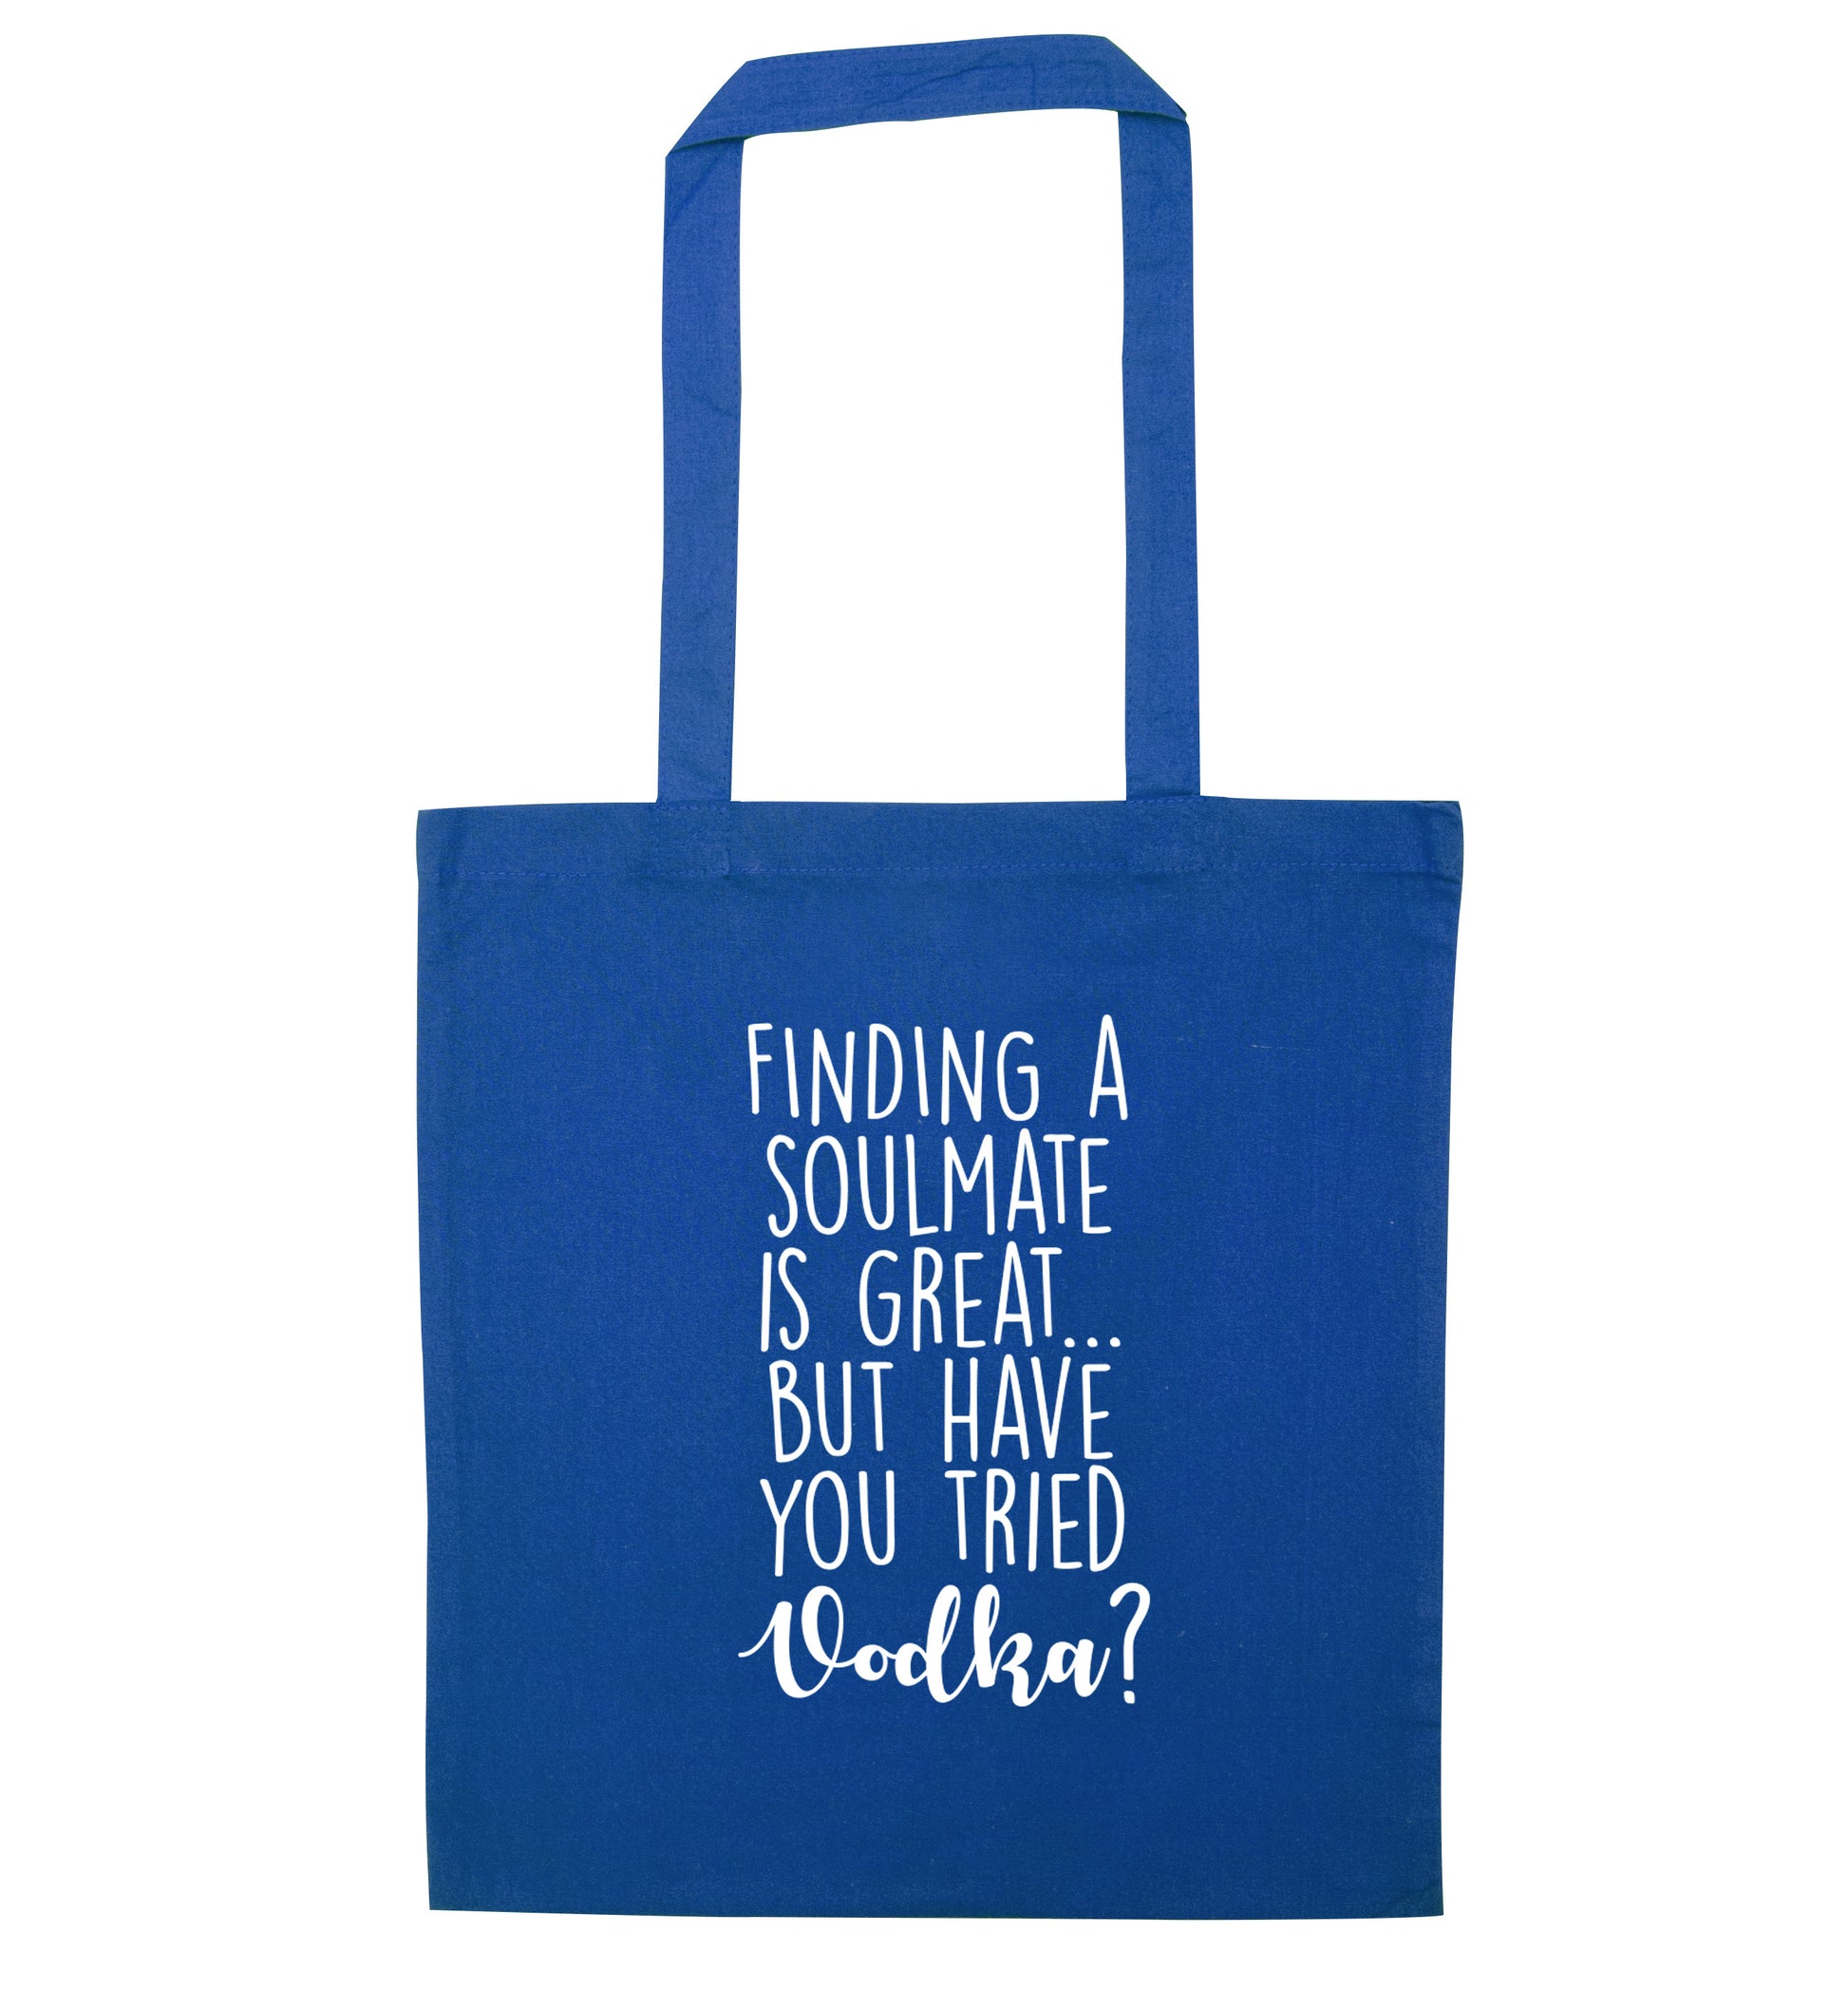 Finding a soulmate is great but have you tried vodka? blue tote bag